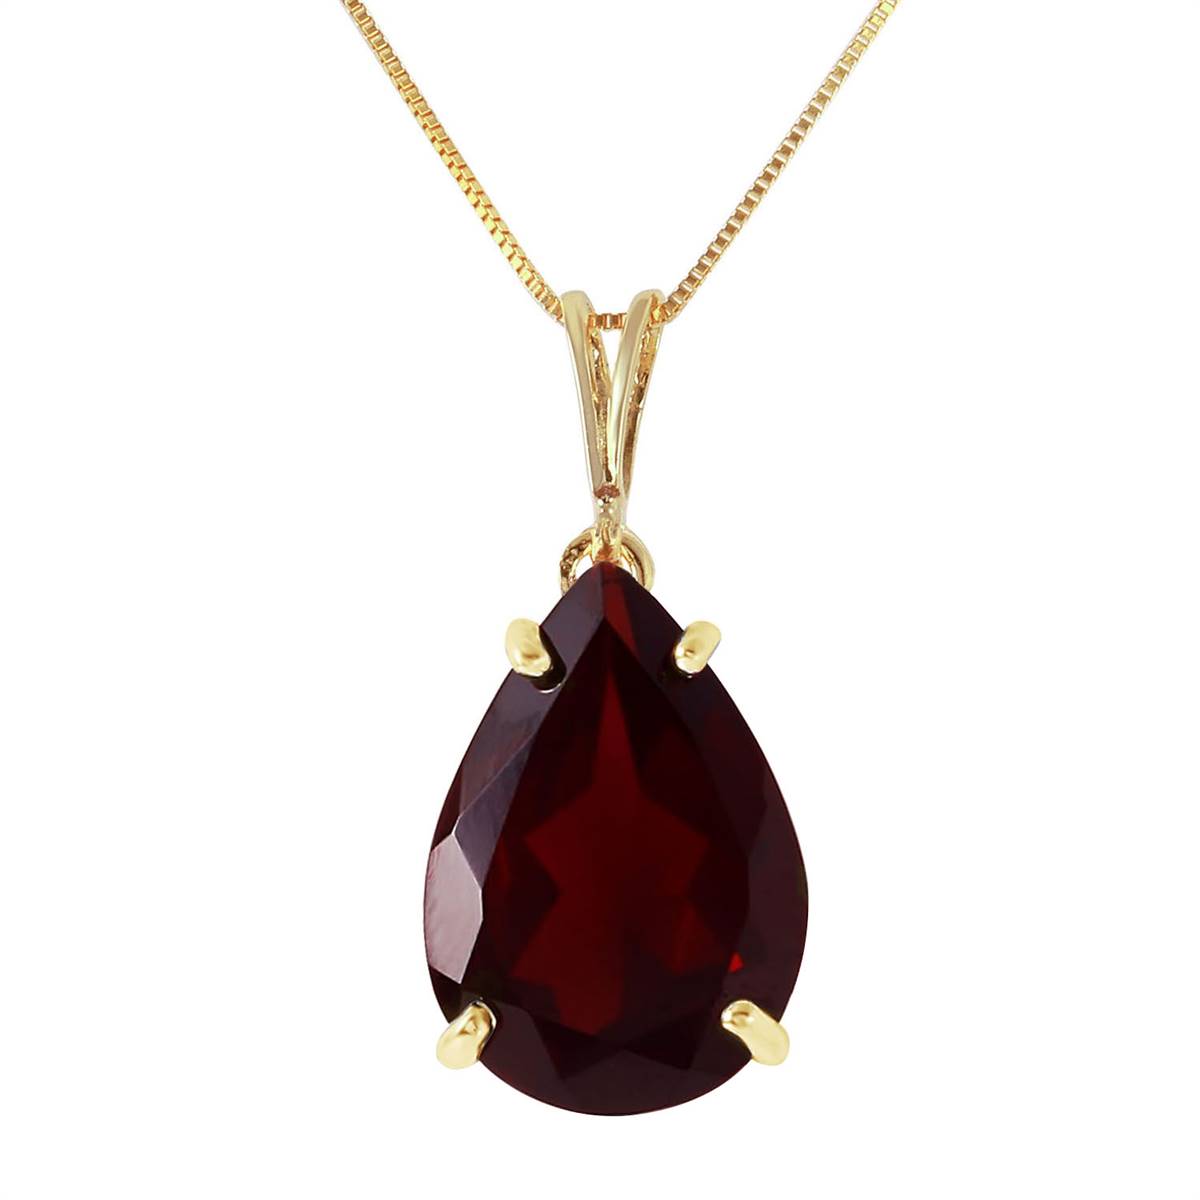 5 Carat 14K Solid Yellow Gold Written In Naturale Garnet Necklace